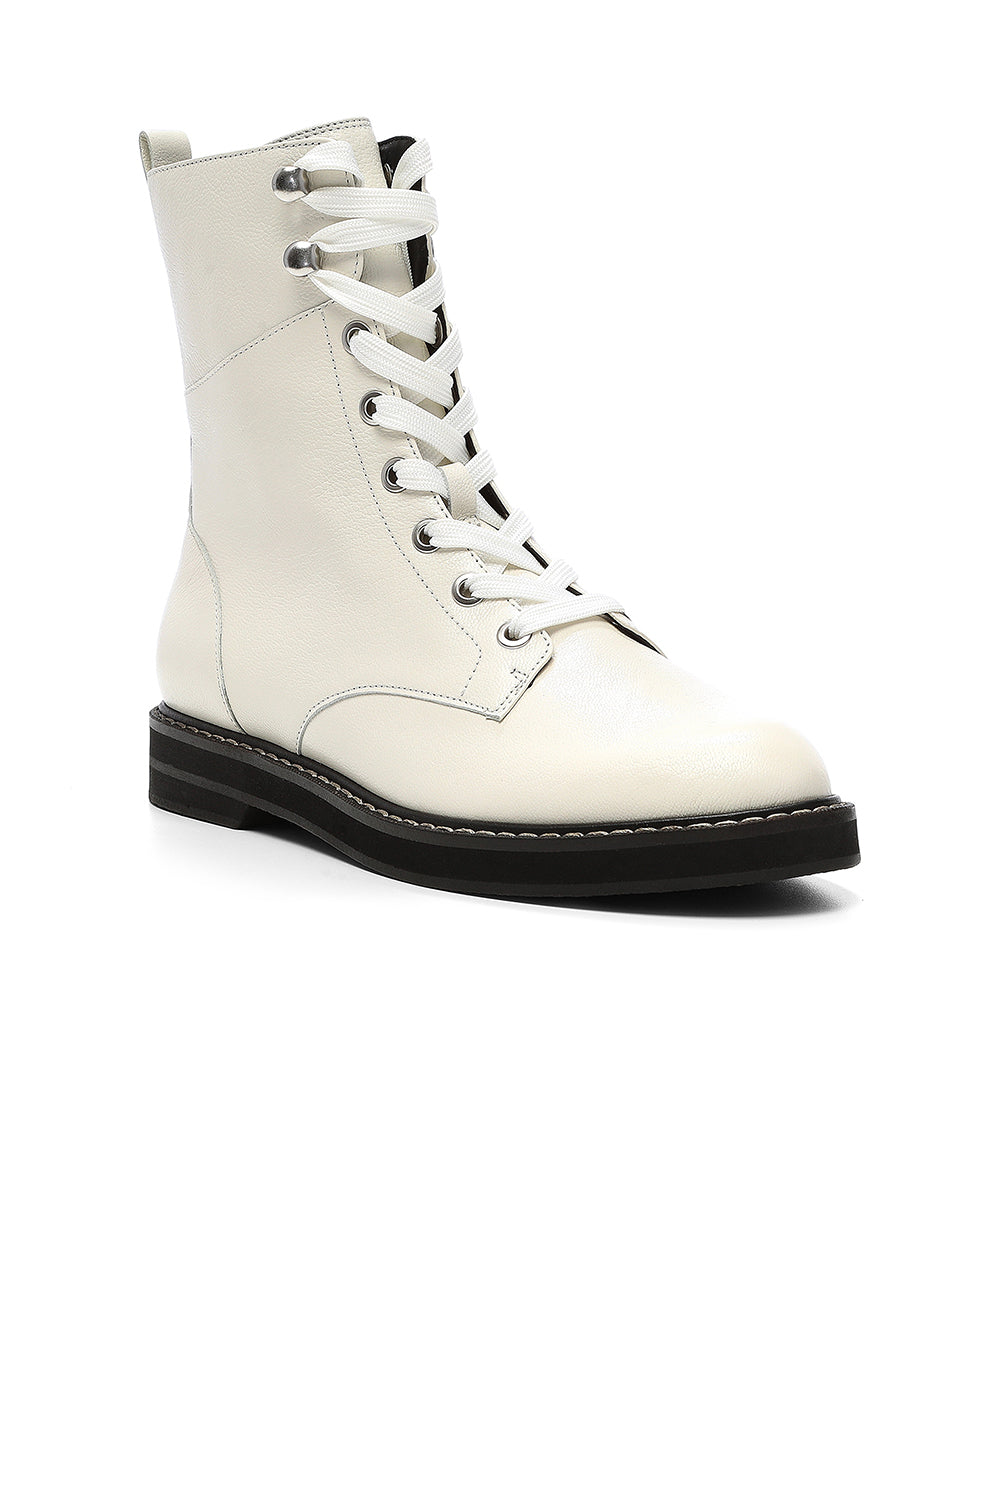 NYDJ Estella Lace-Up Boots In Distressed Leather - Off White